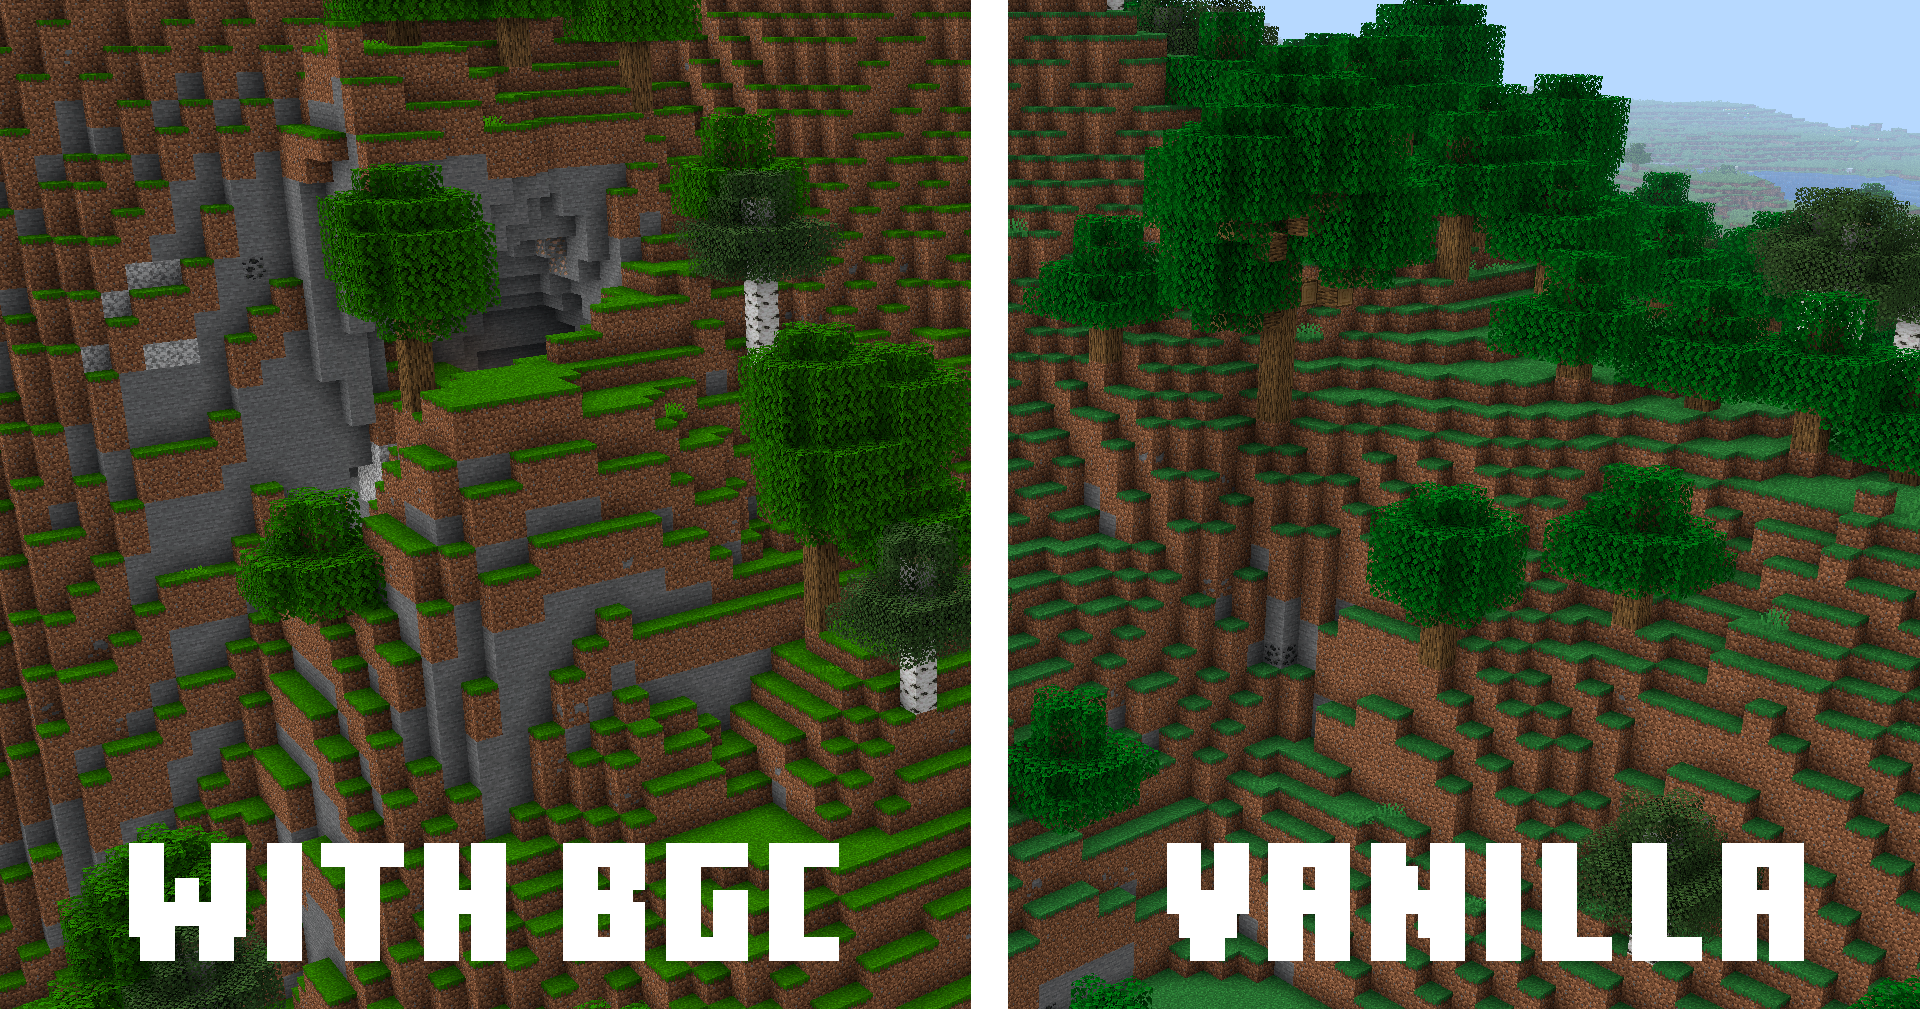 Comparison of grassy mountain with and without pack